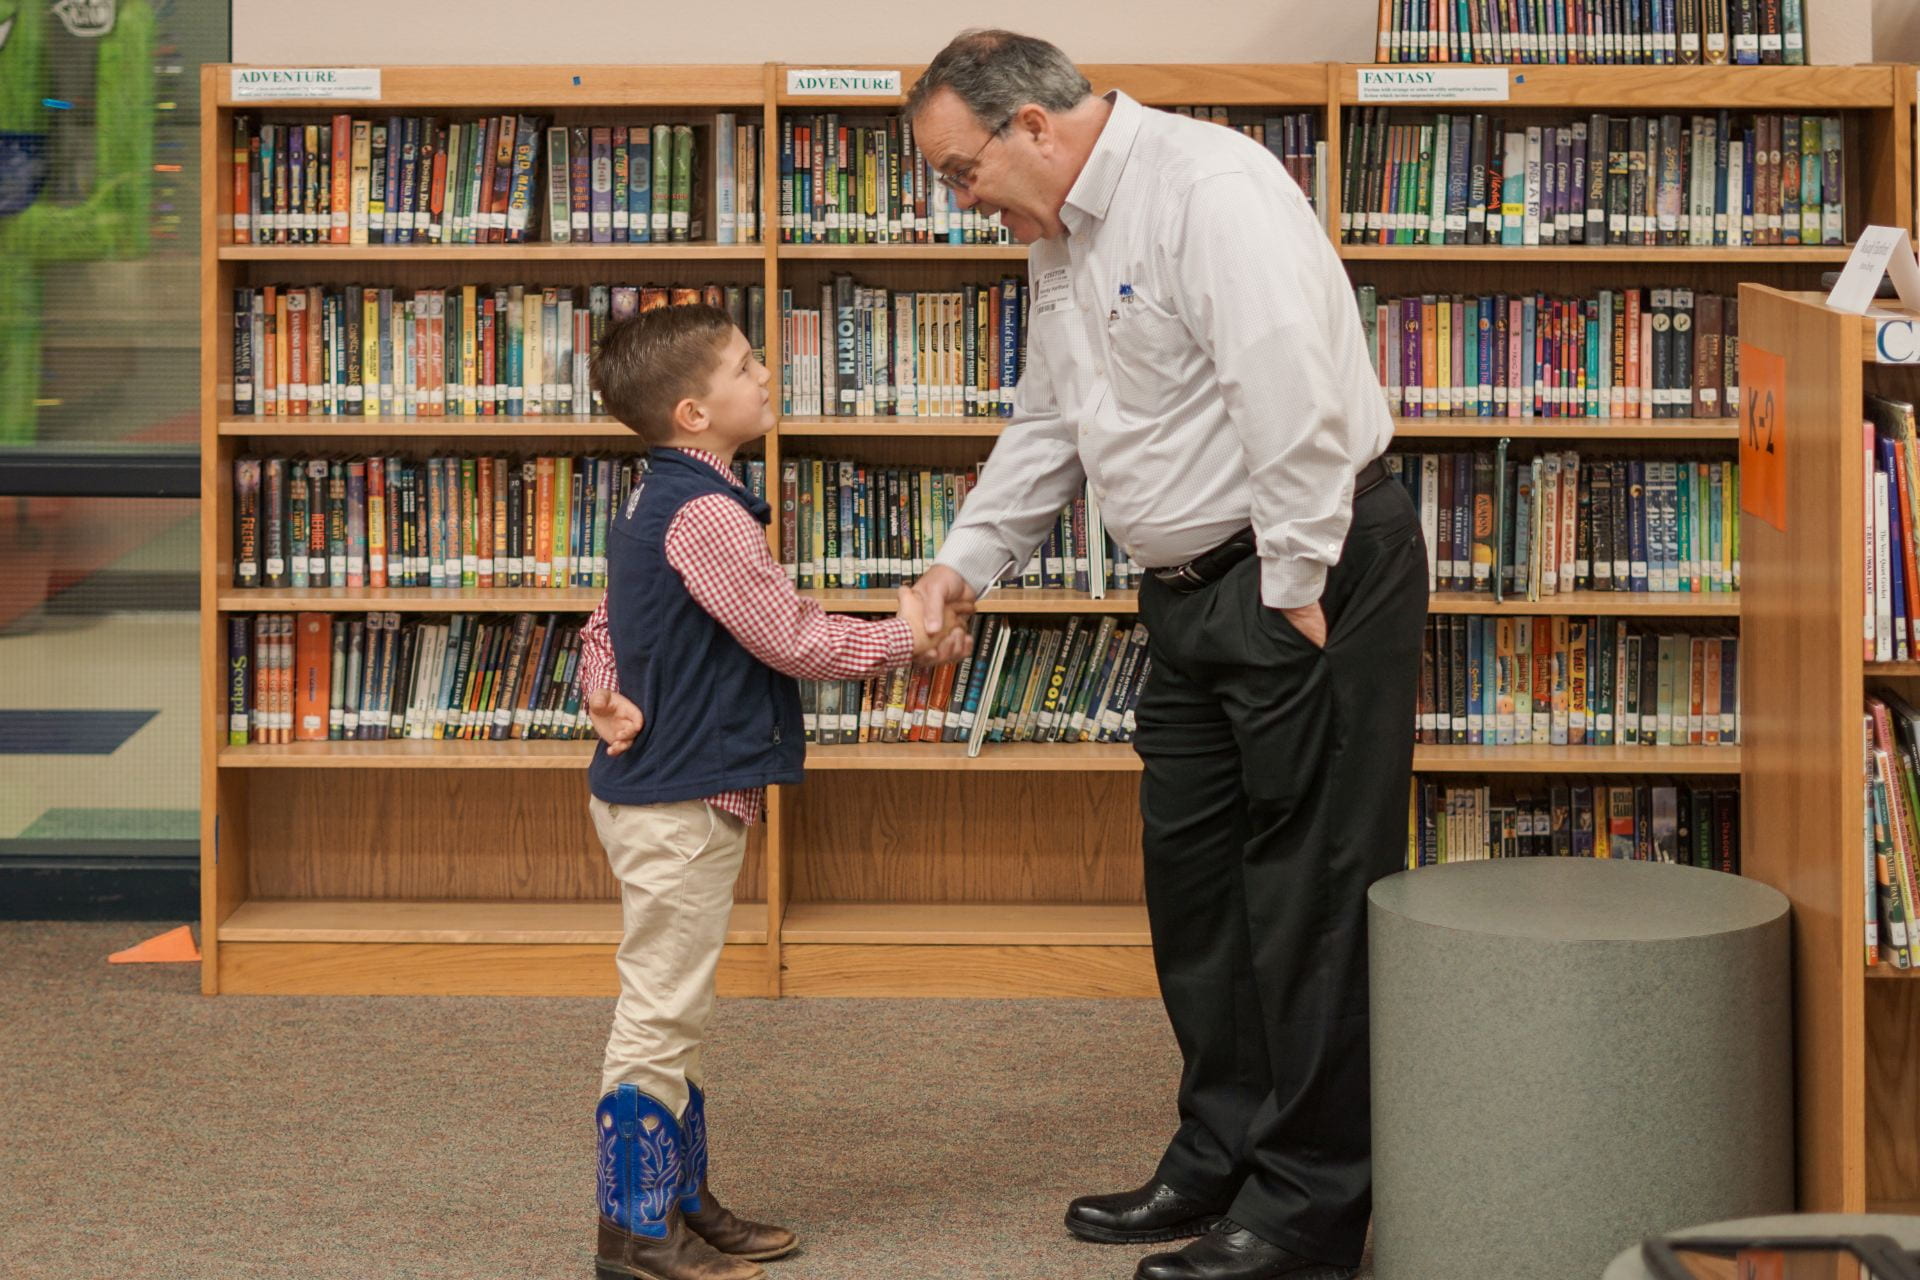 Community volunteer shaking hands with a student in a library